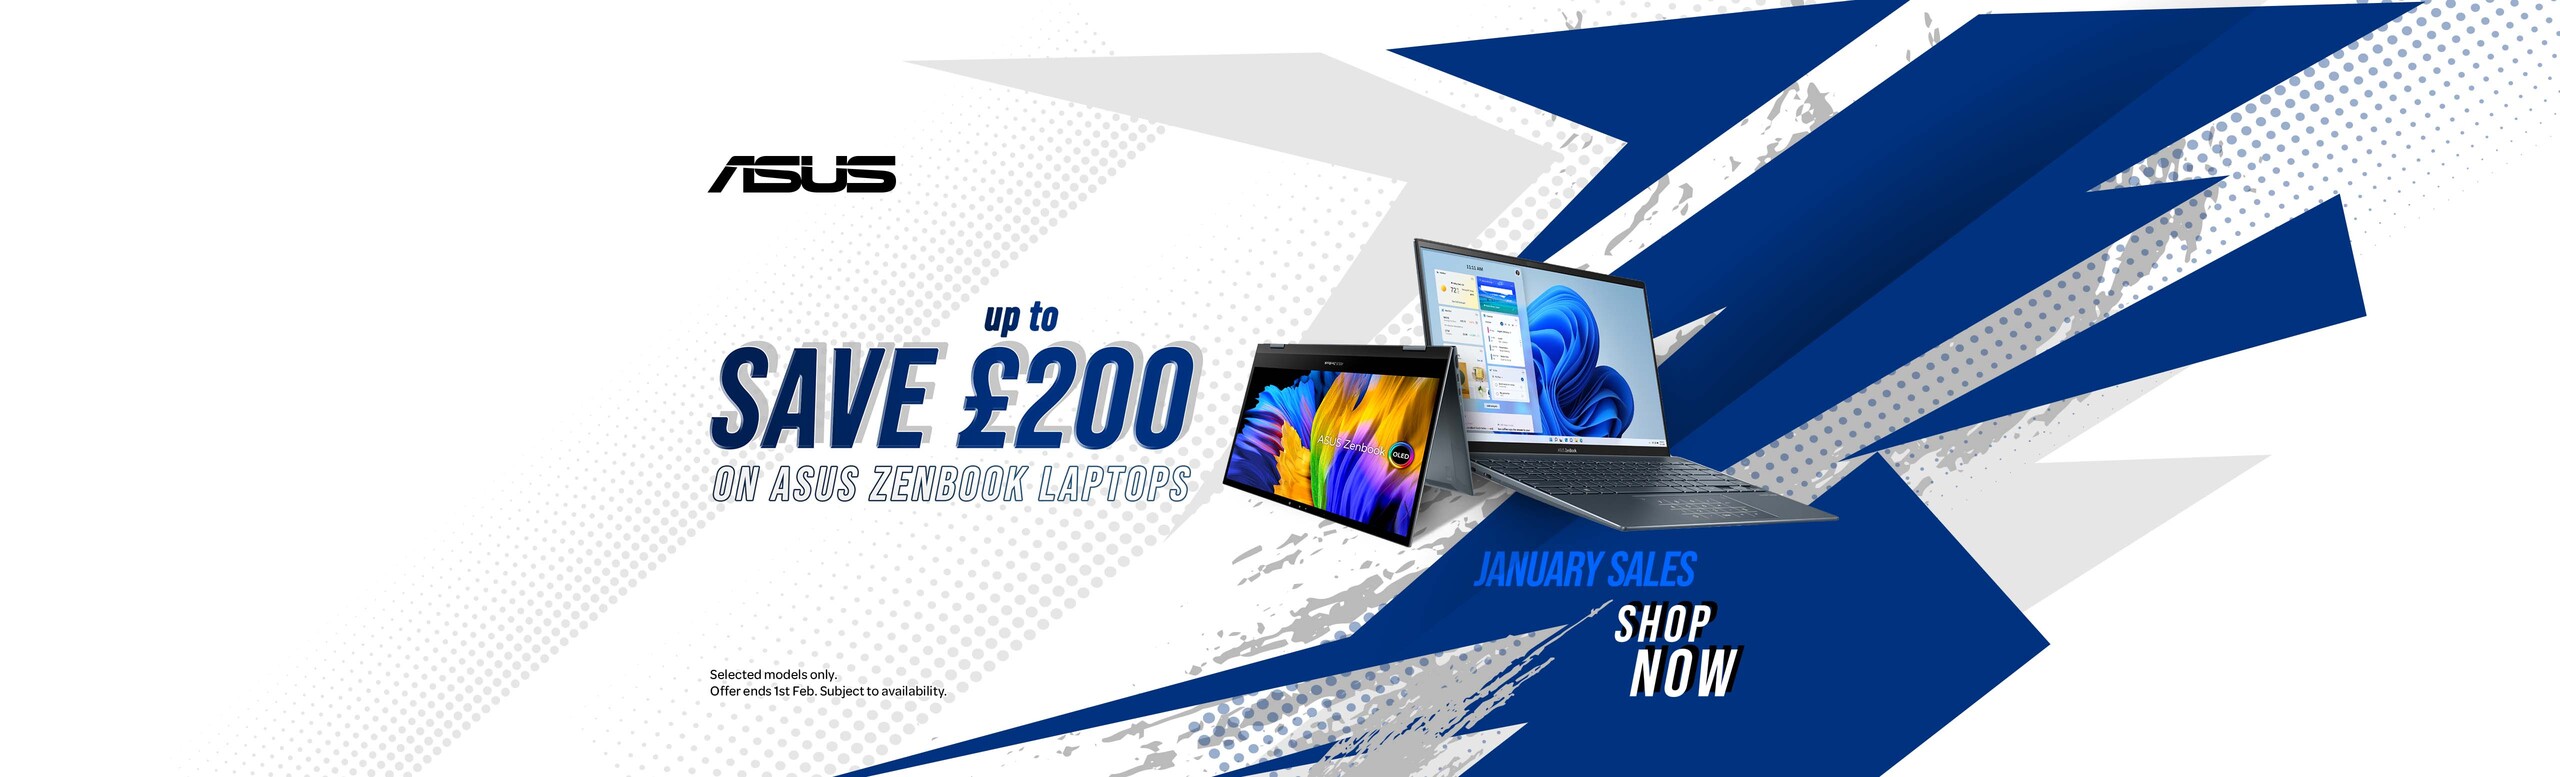 Jan Sale - Save up to £200 on selected laptops